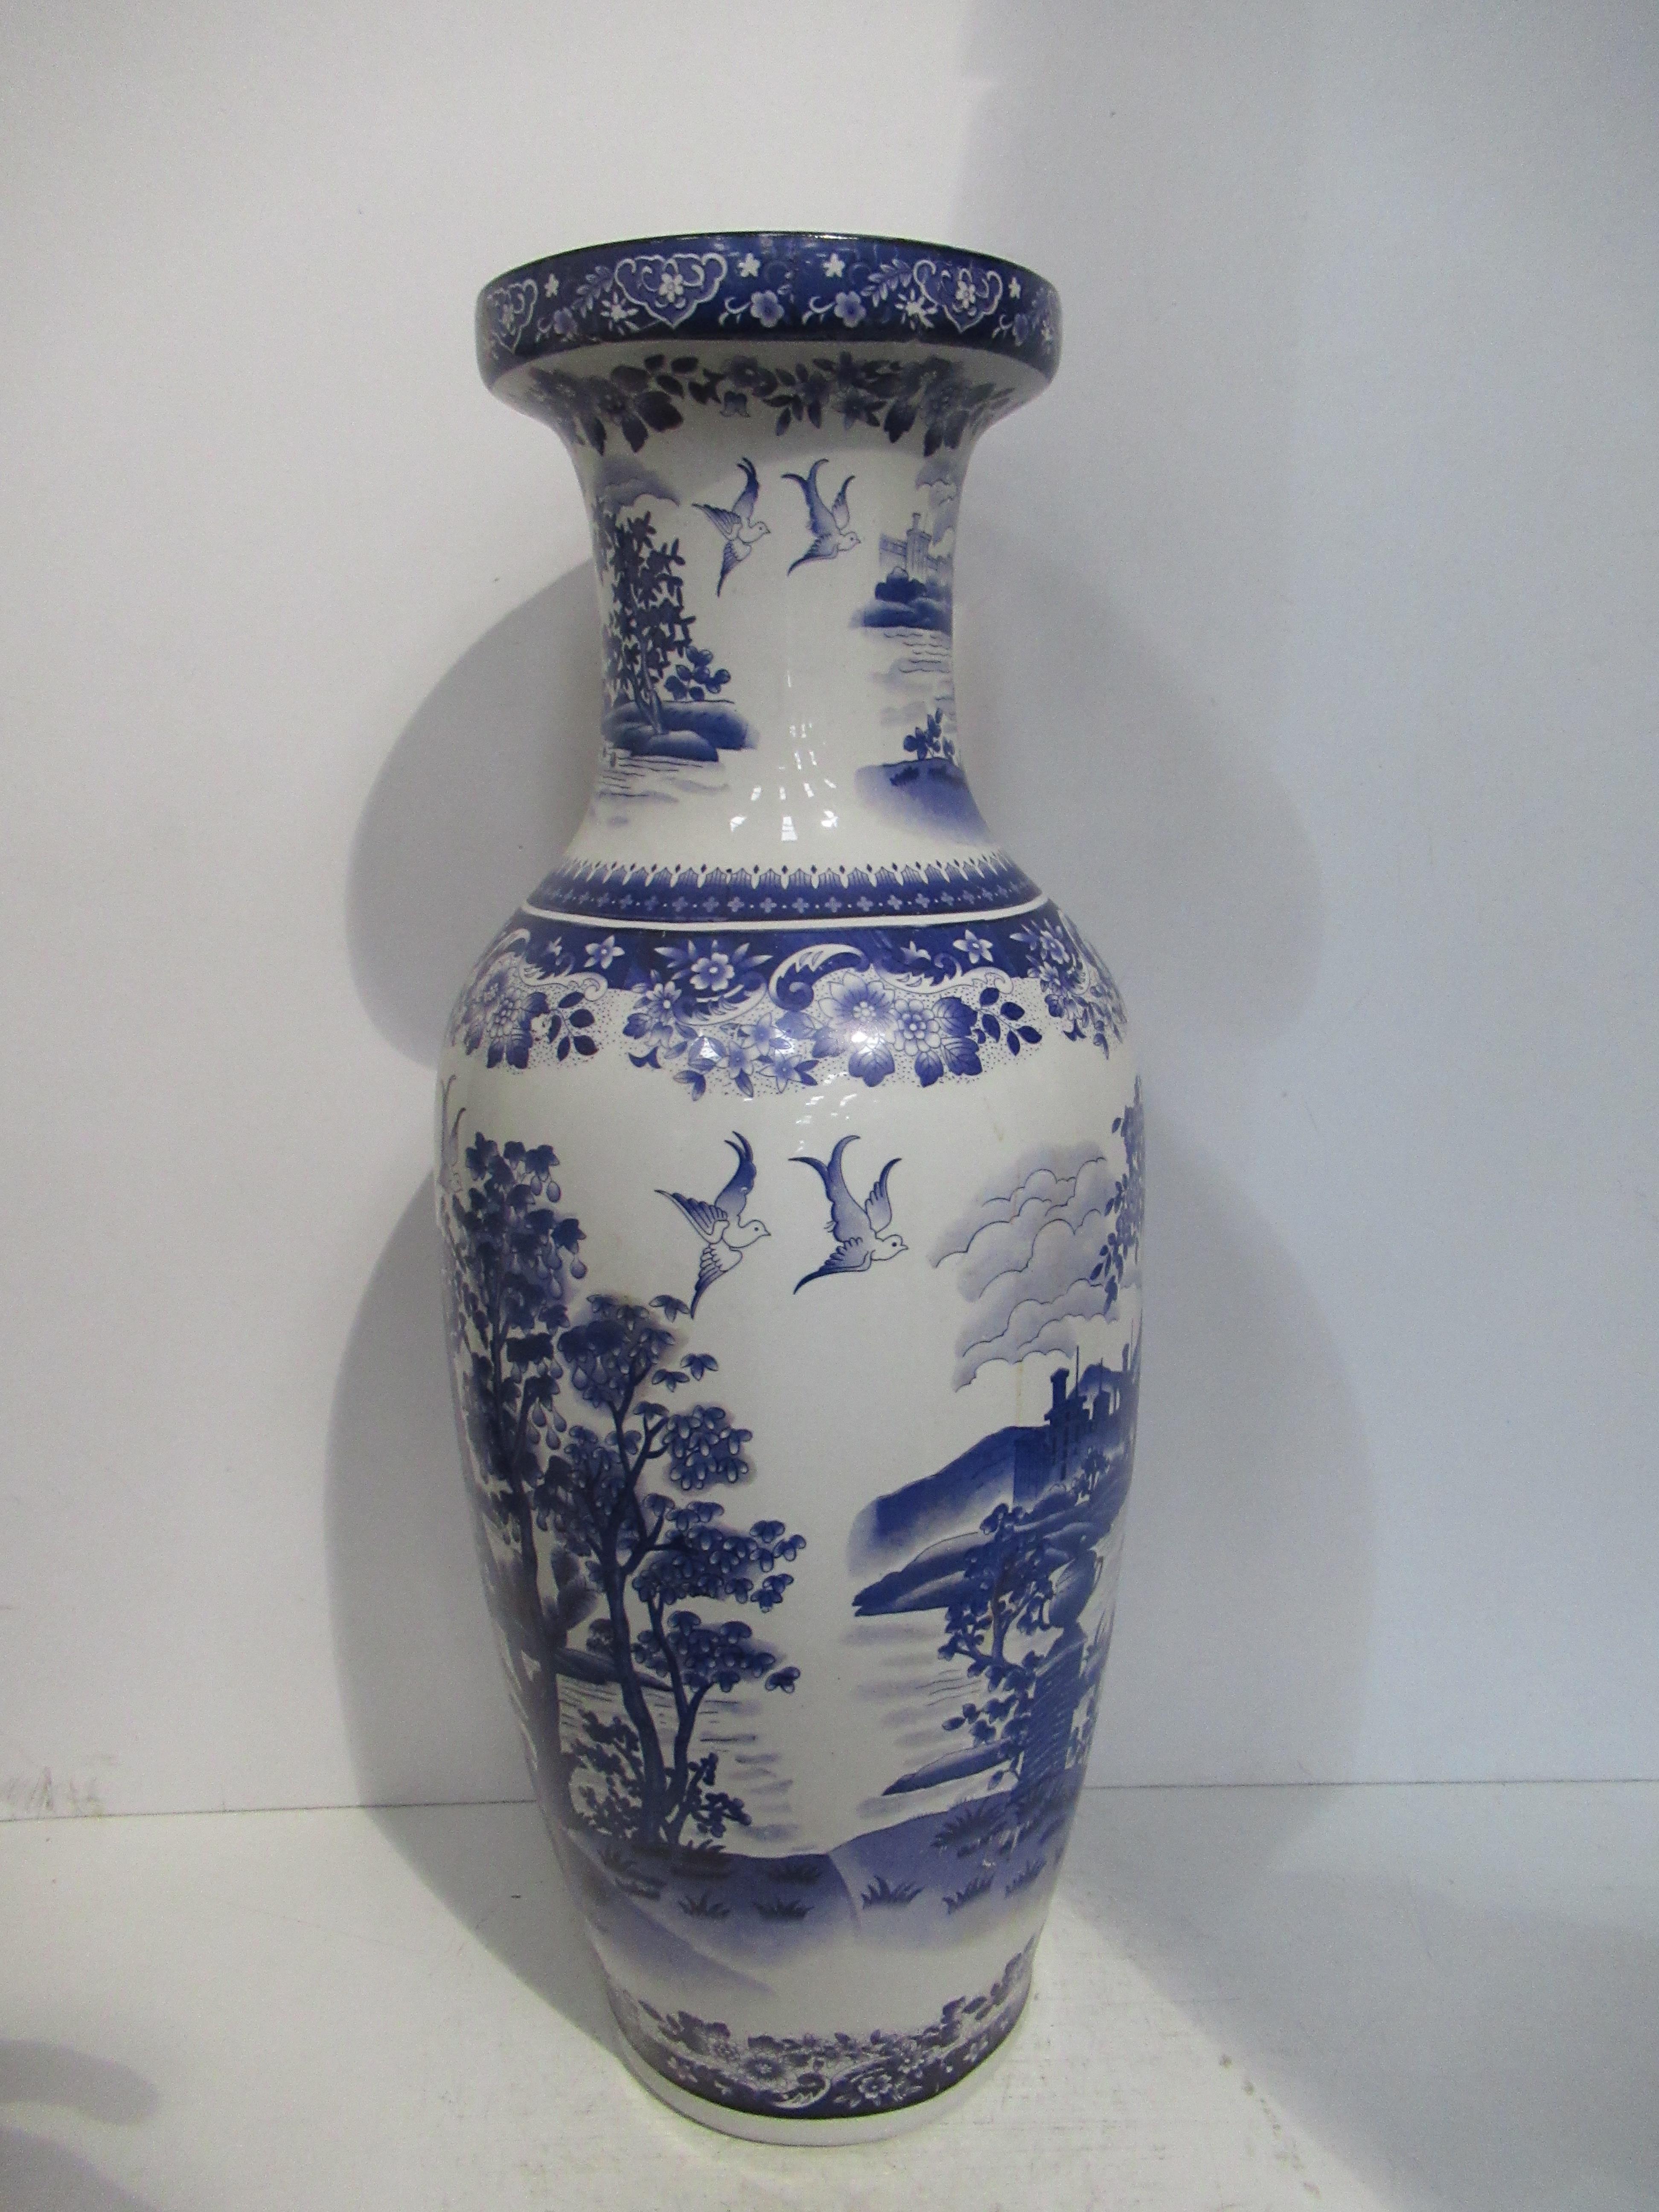 A Blue and White Japanese Vase (60cm Tall) - Image 4 of 5